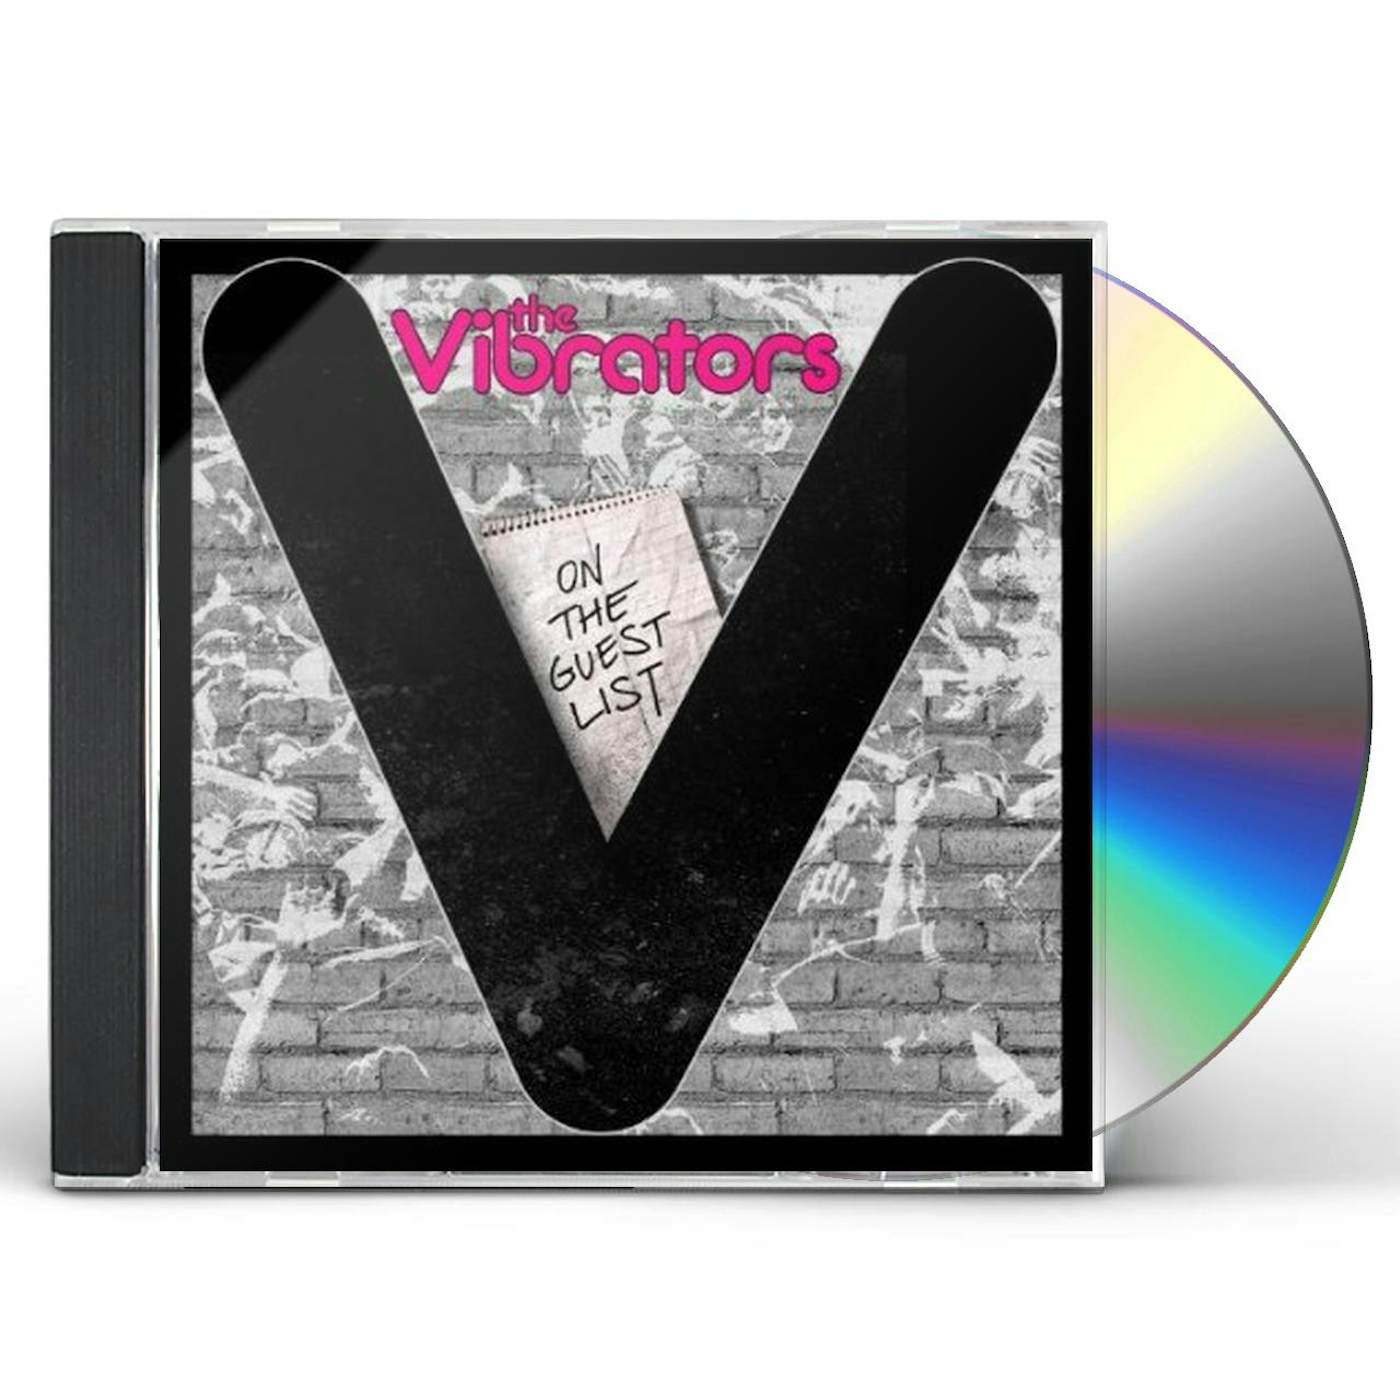 The Vibrators ON THE GUEST LIST CD